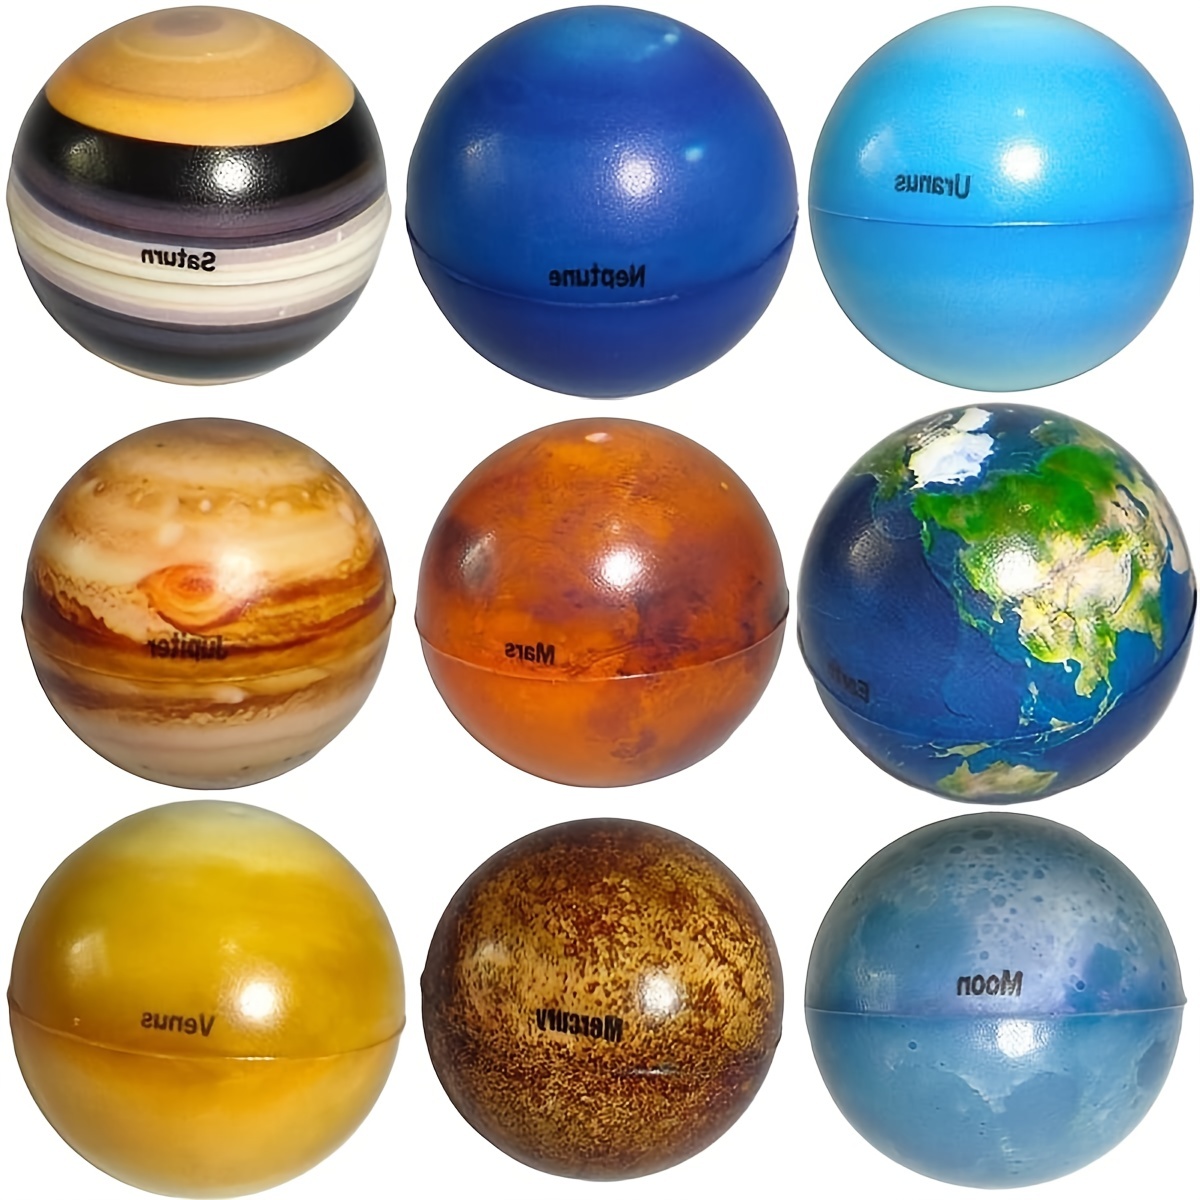 Cute Solar System Bouncy Ball Toy Set - Educational Learning Toy - Outer Space Planets